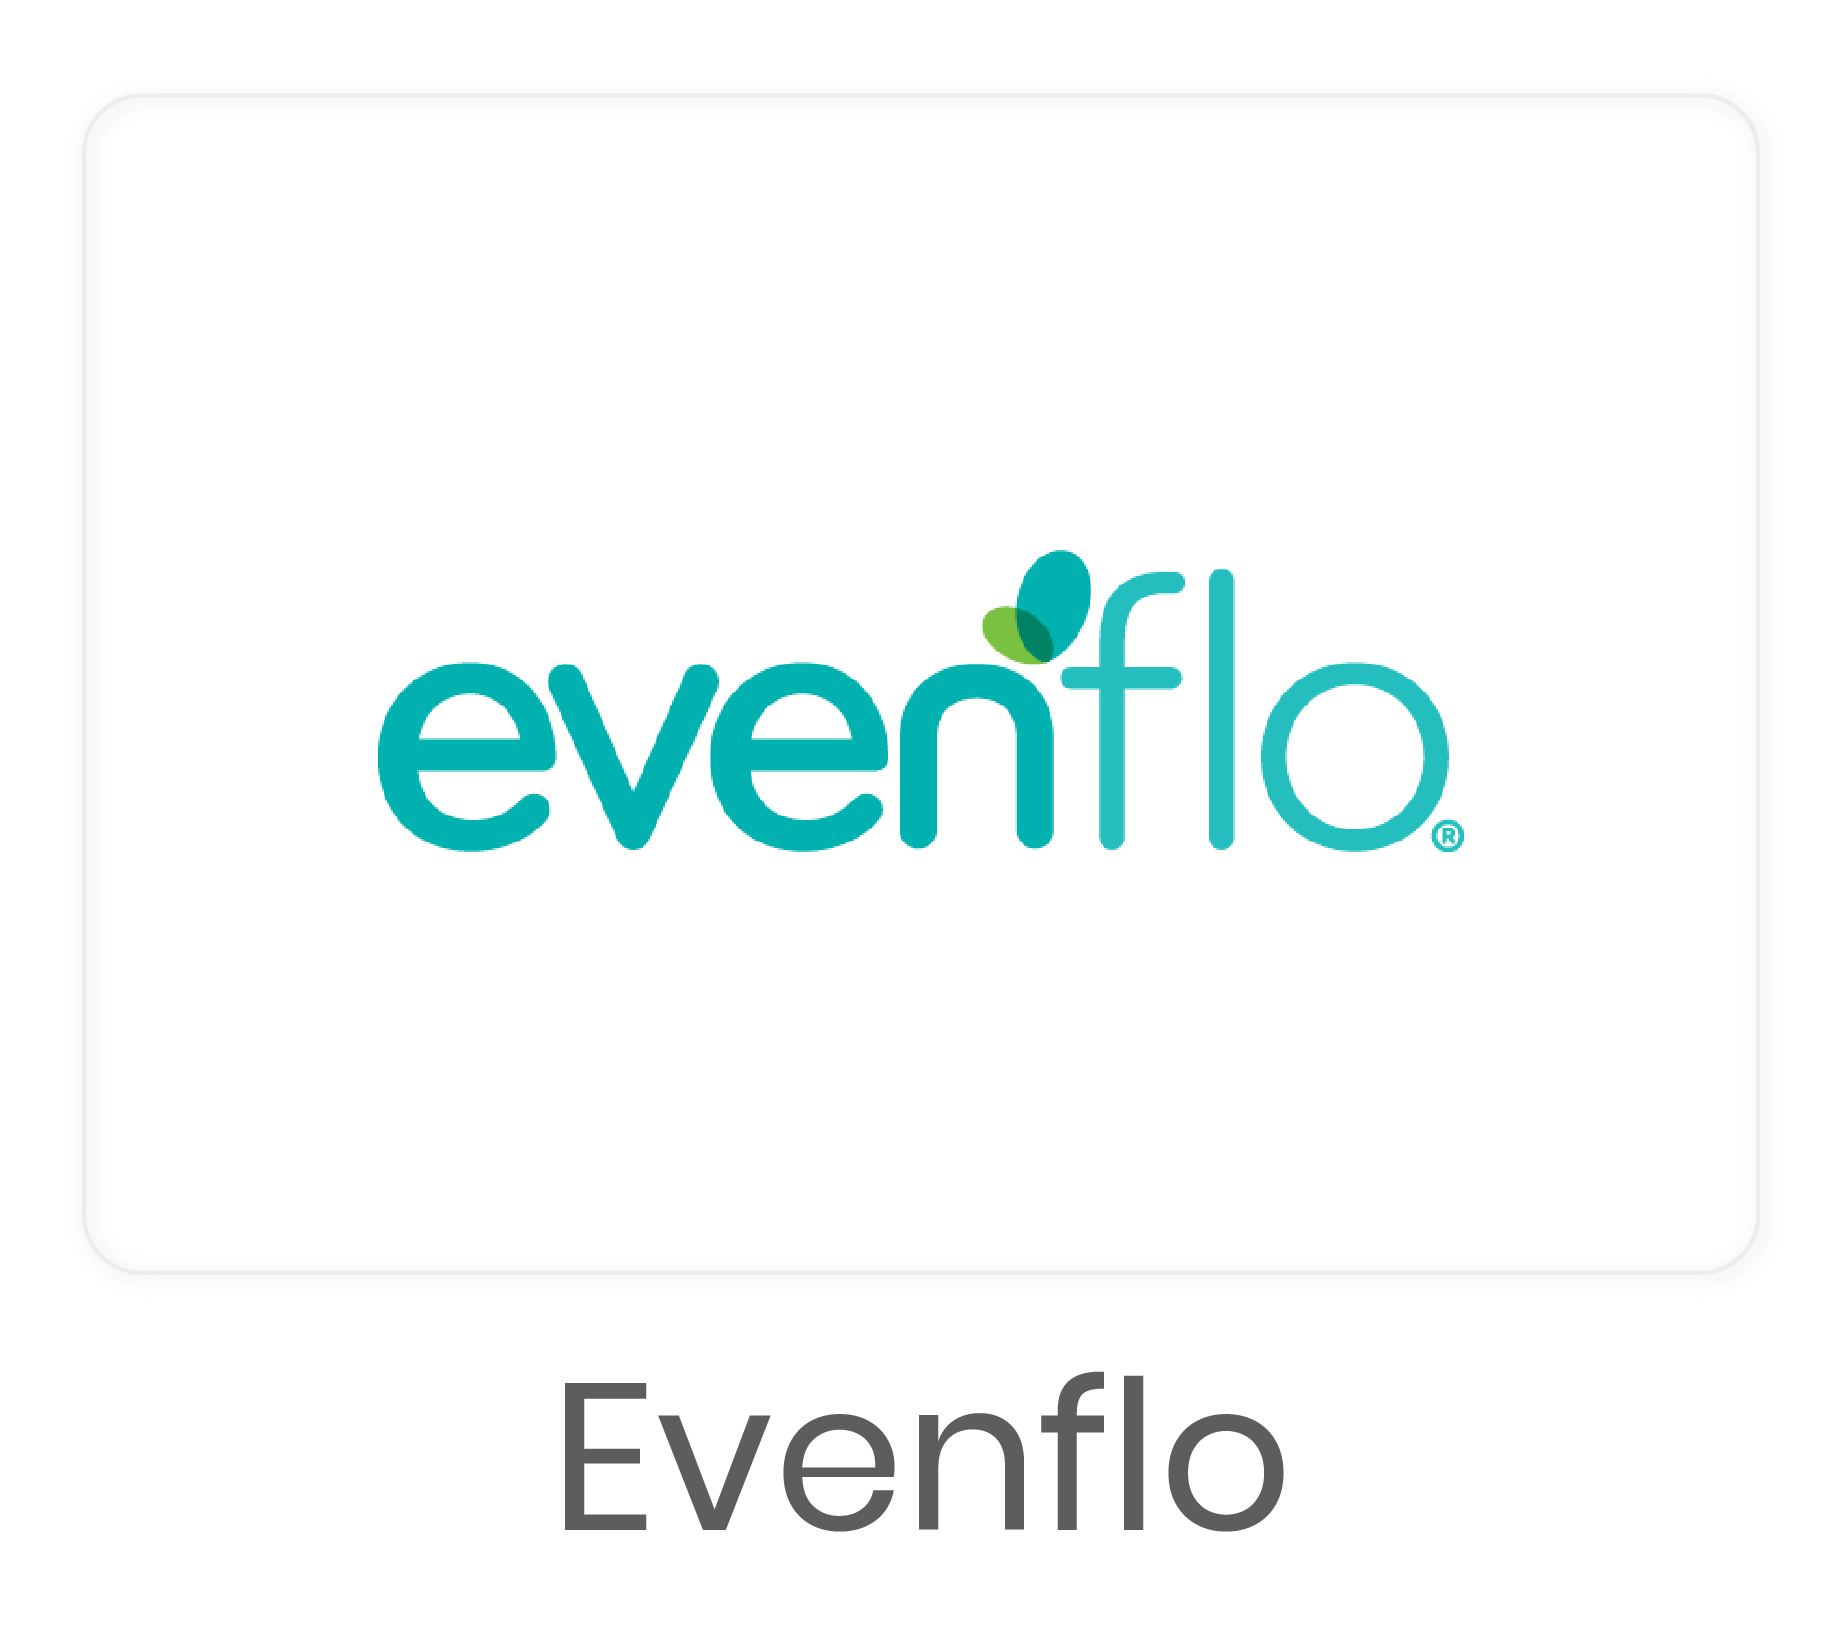 Evenflo-31.png